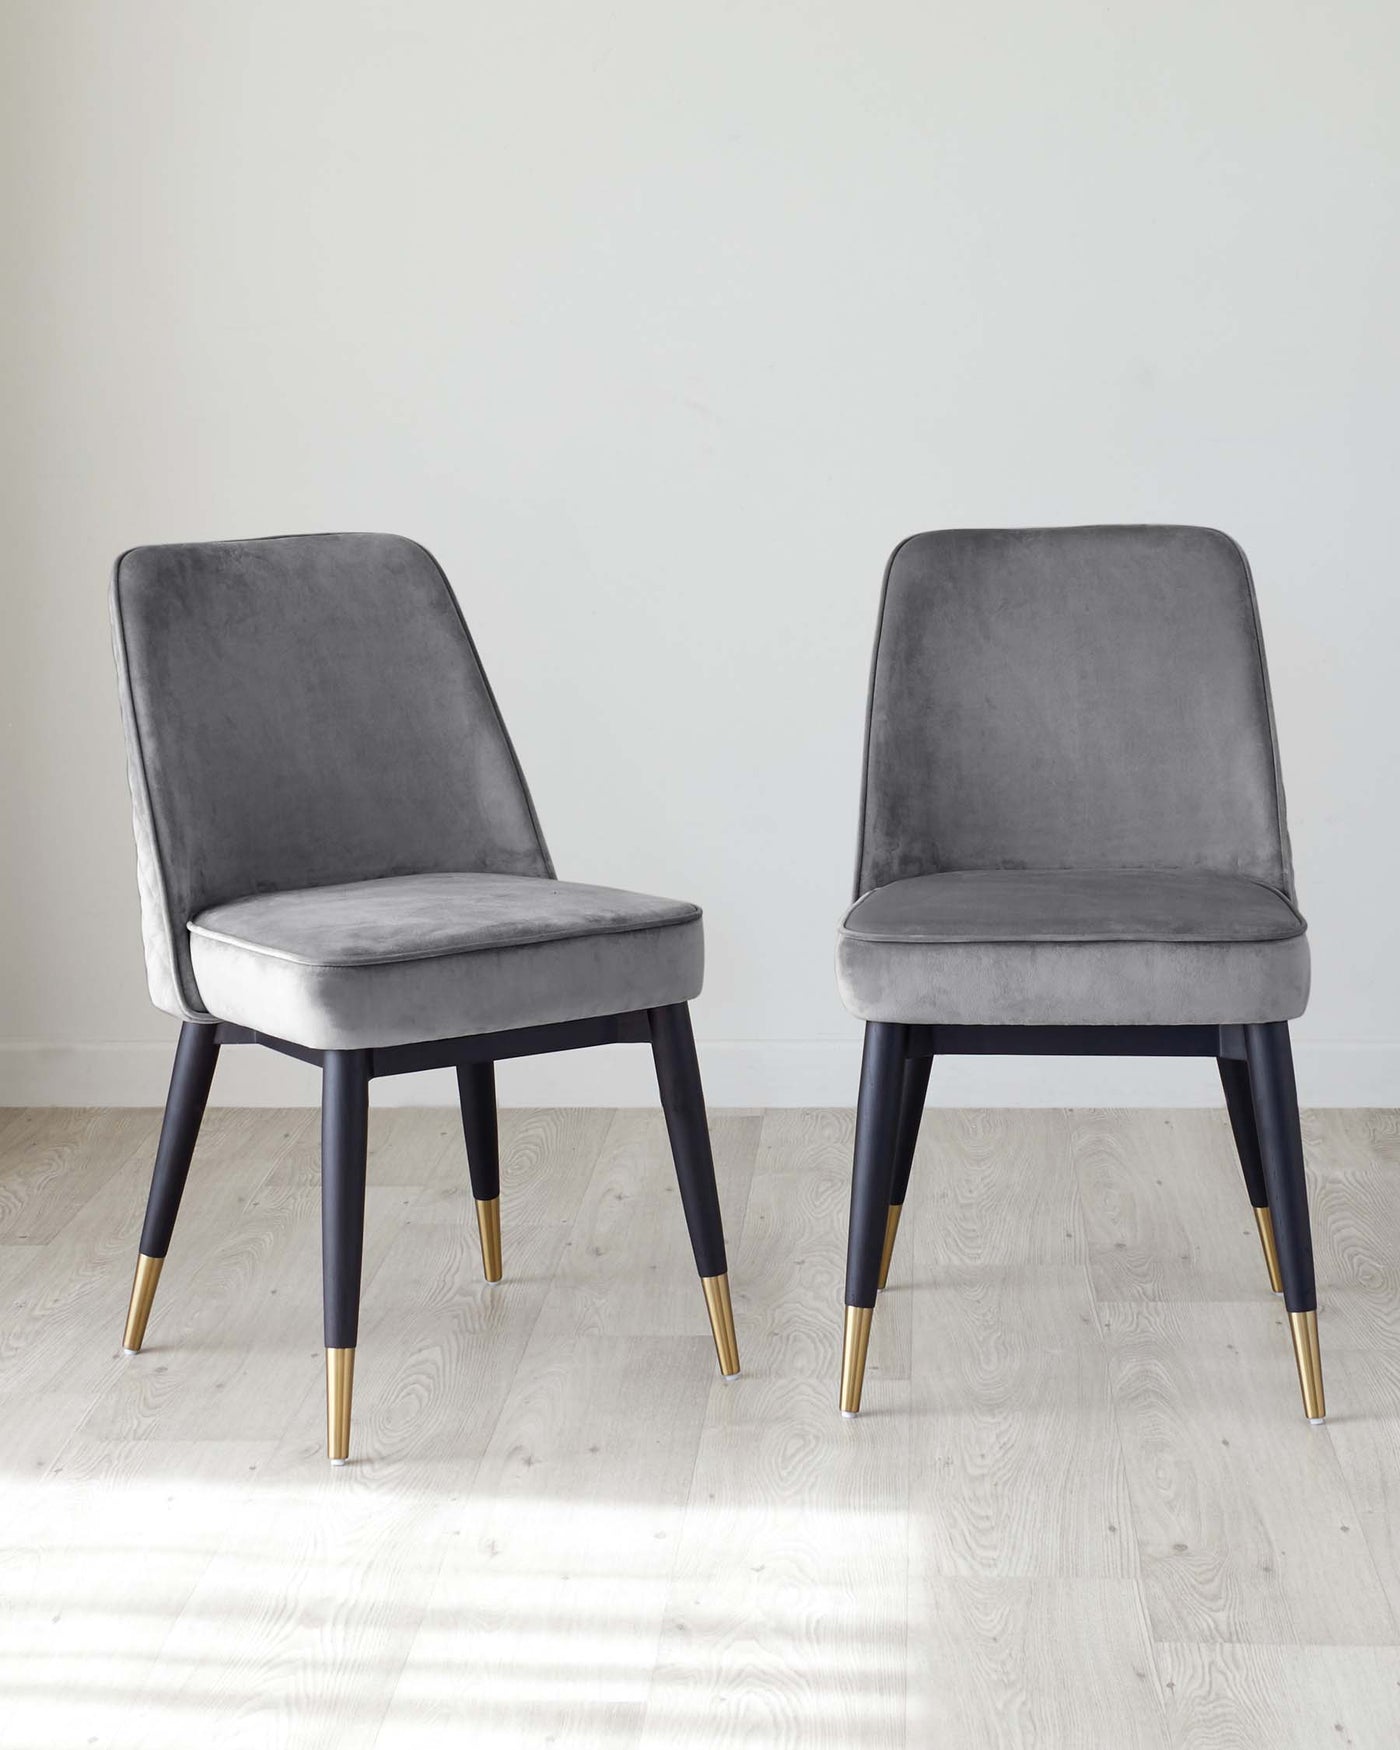 Two modern dining chairs with elegant grey velvet upholstery and dark wood legs tipped with gold accents, showcased on a light hardwood floor against a neutral background.